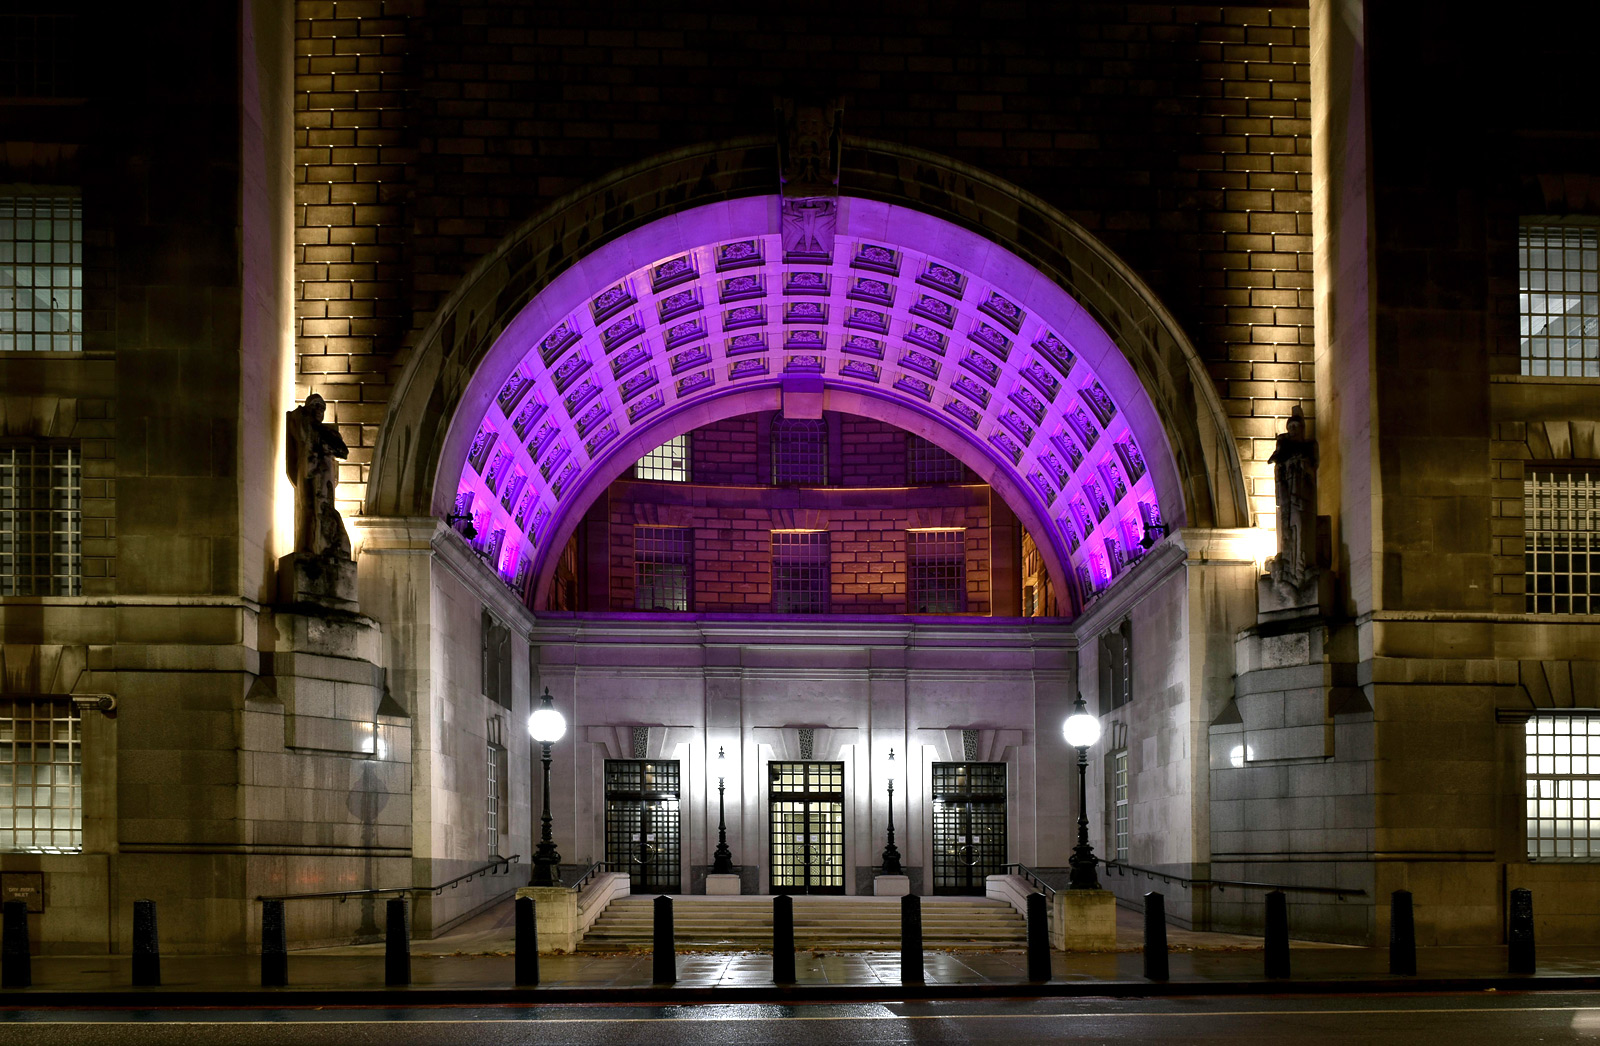 Thames House lit up in purple at night